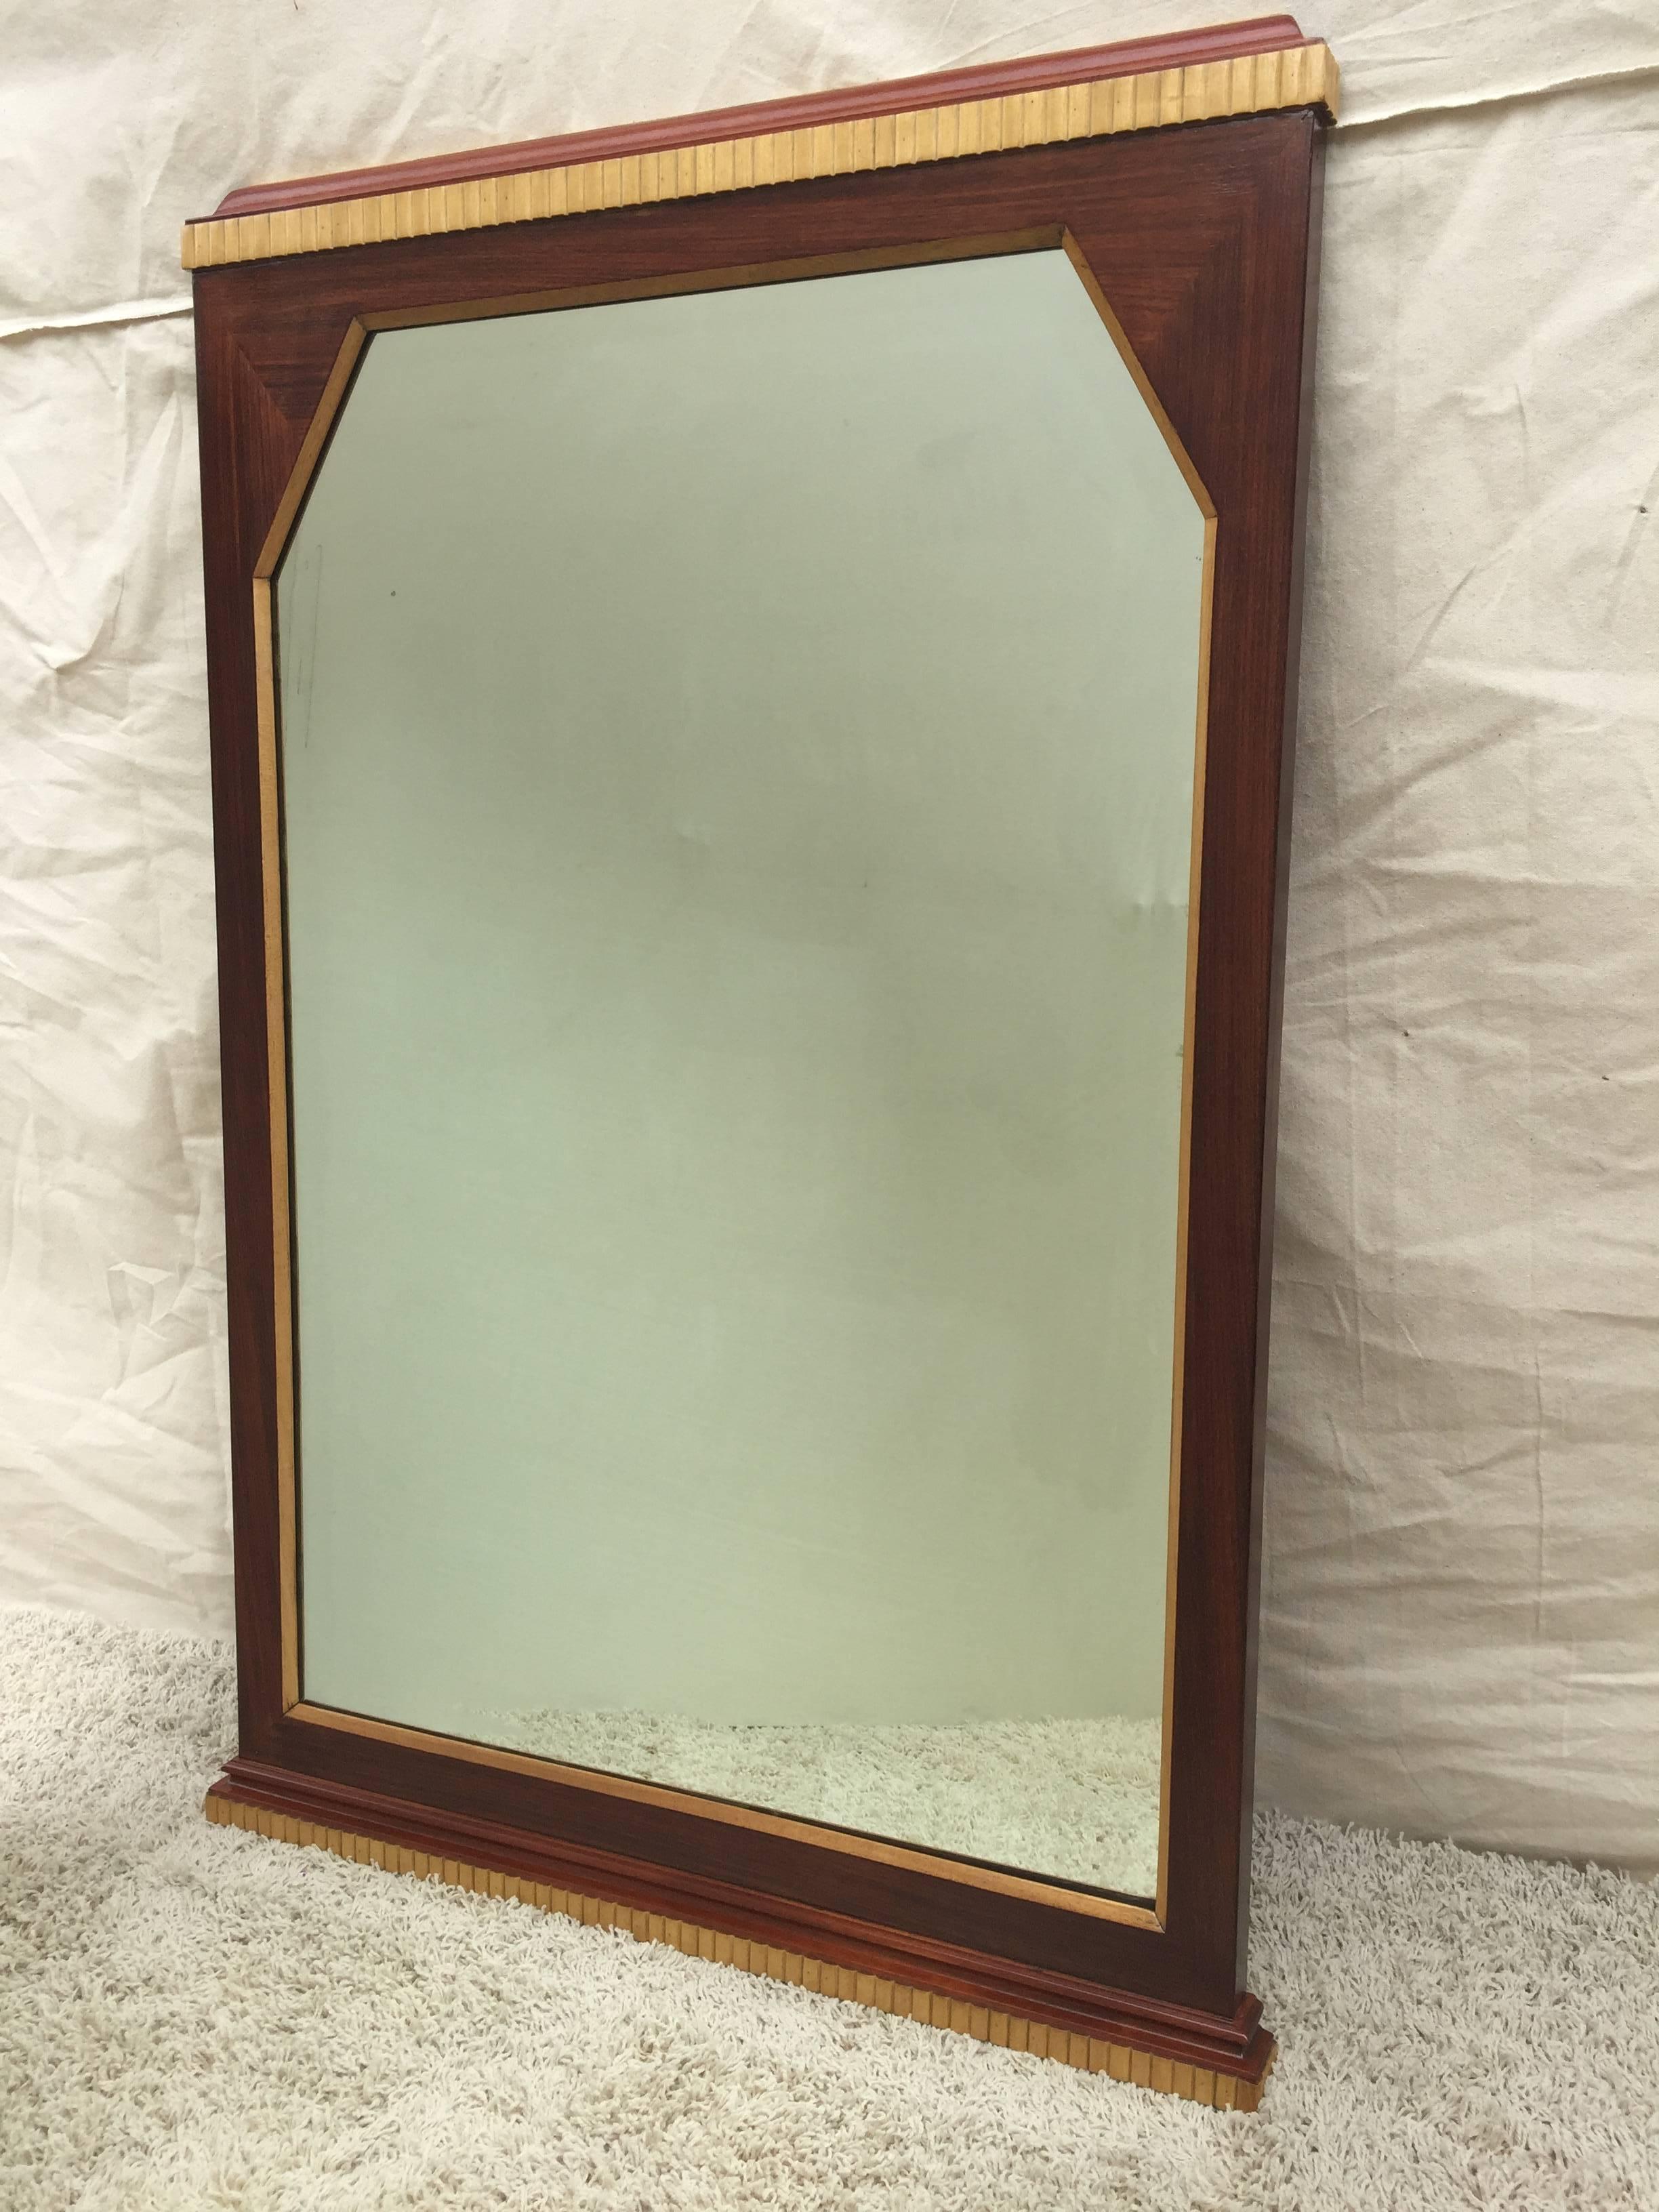 Art Deco French mahogany and birch trim beveled mirror. in a separate listing is the chest of draws/bureau.